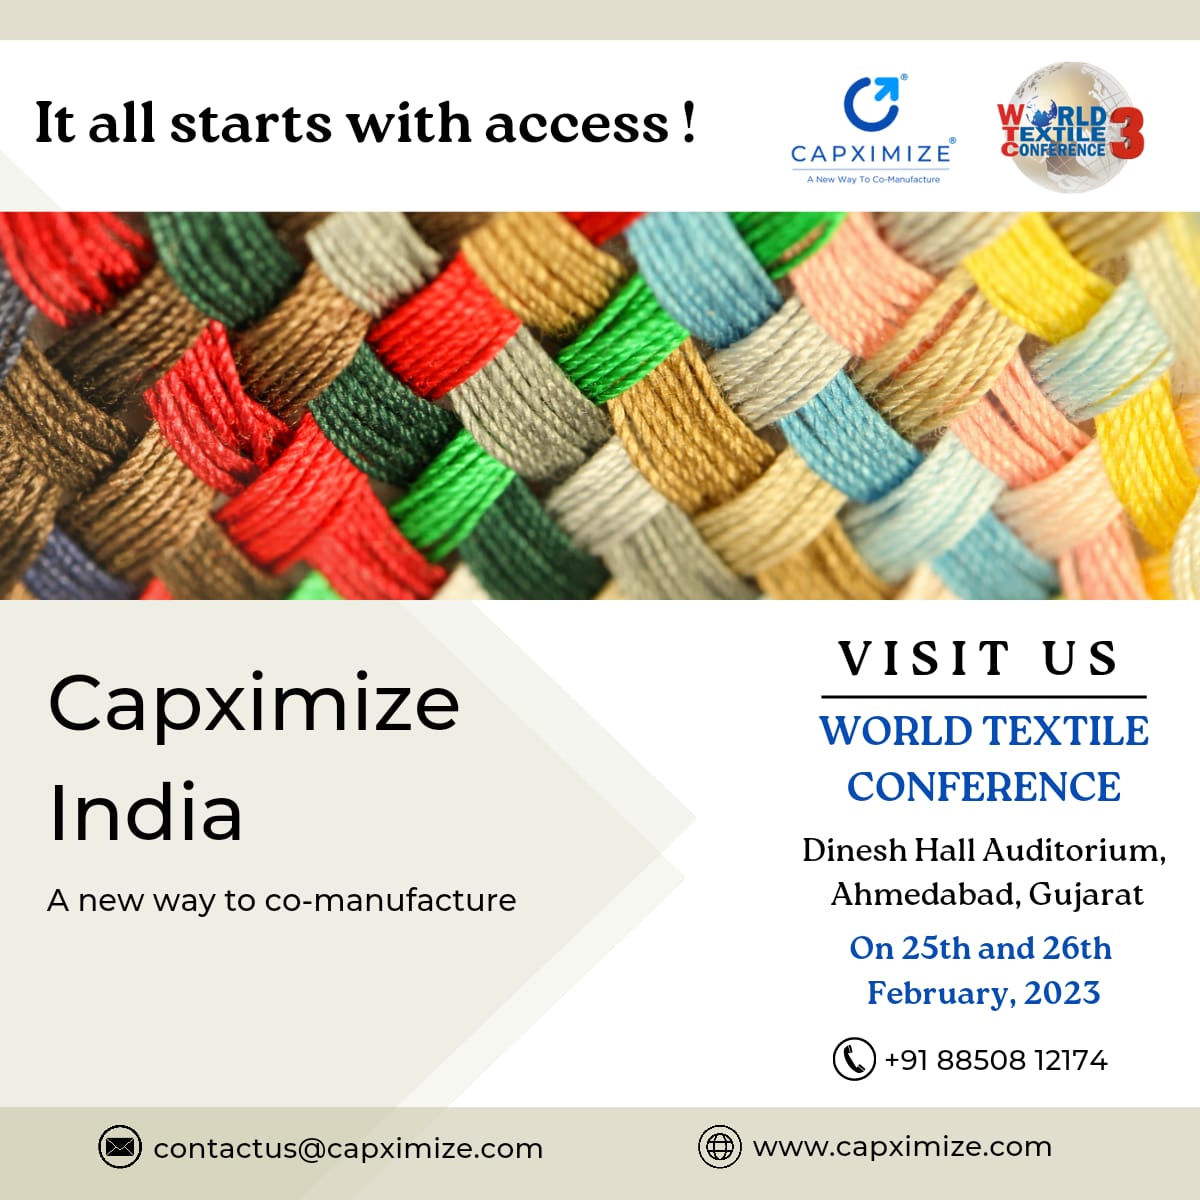 World Textile Conference